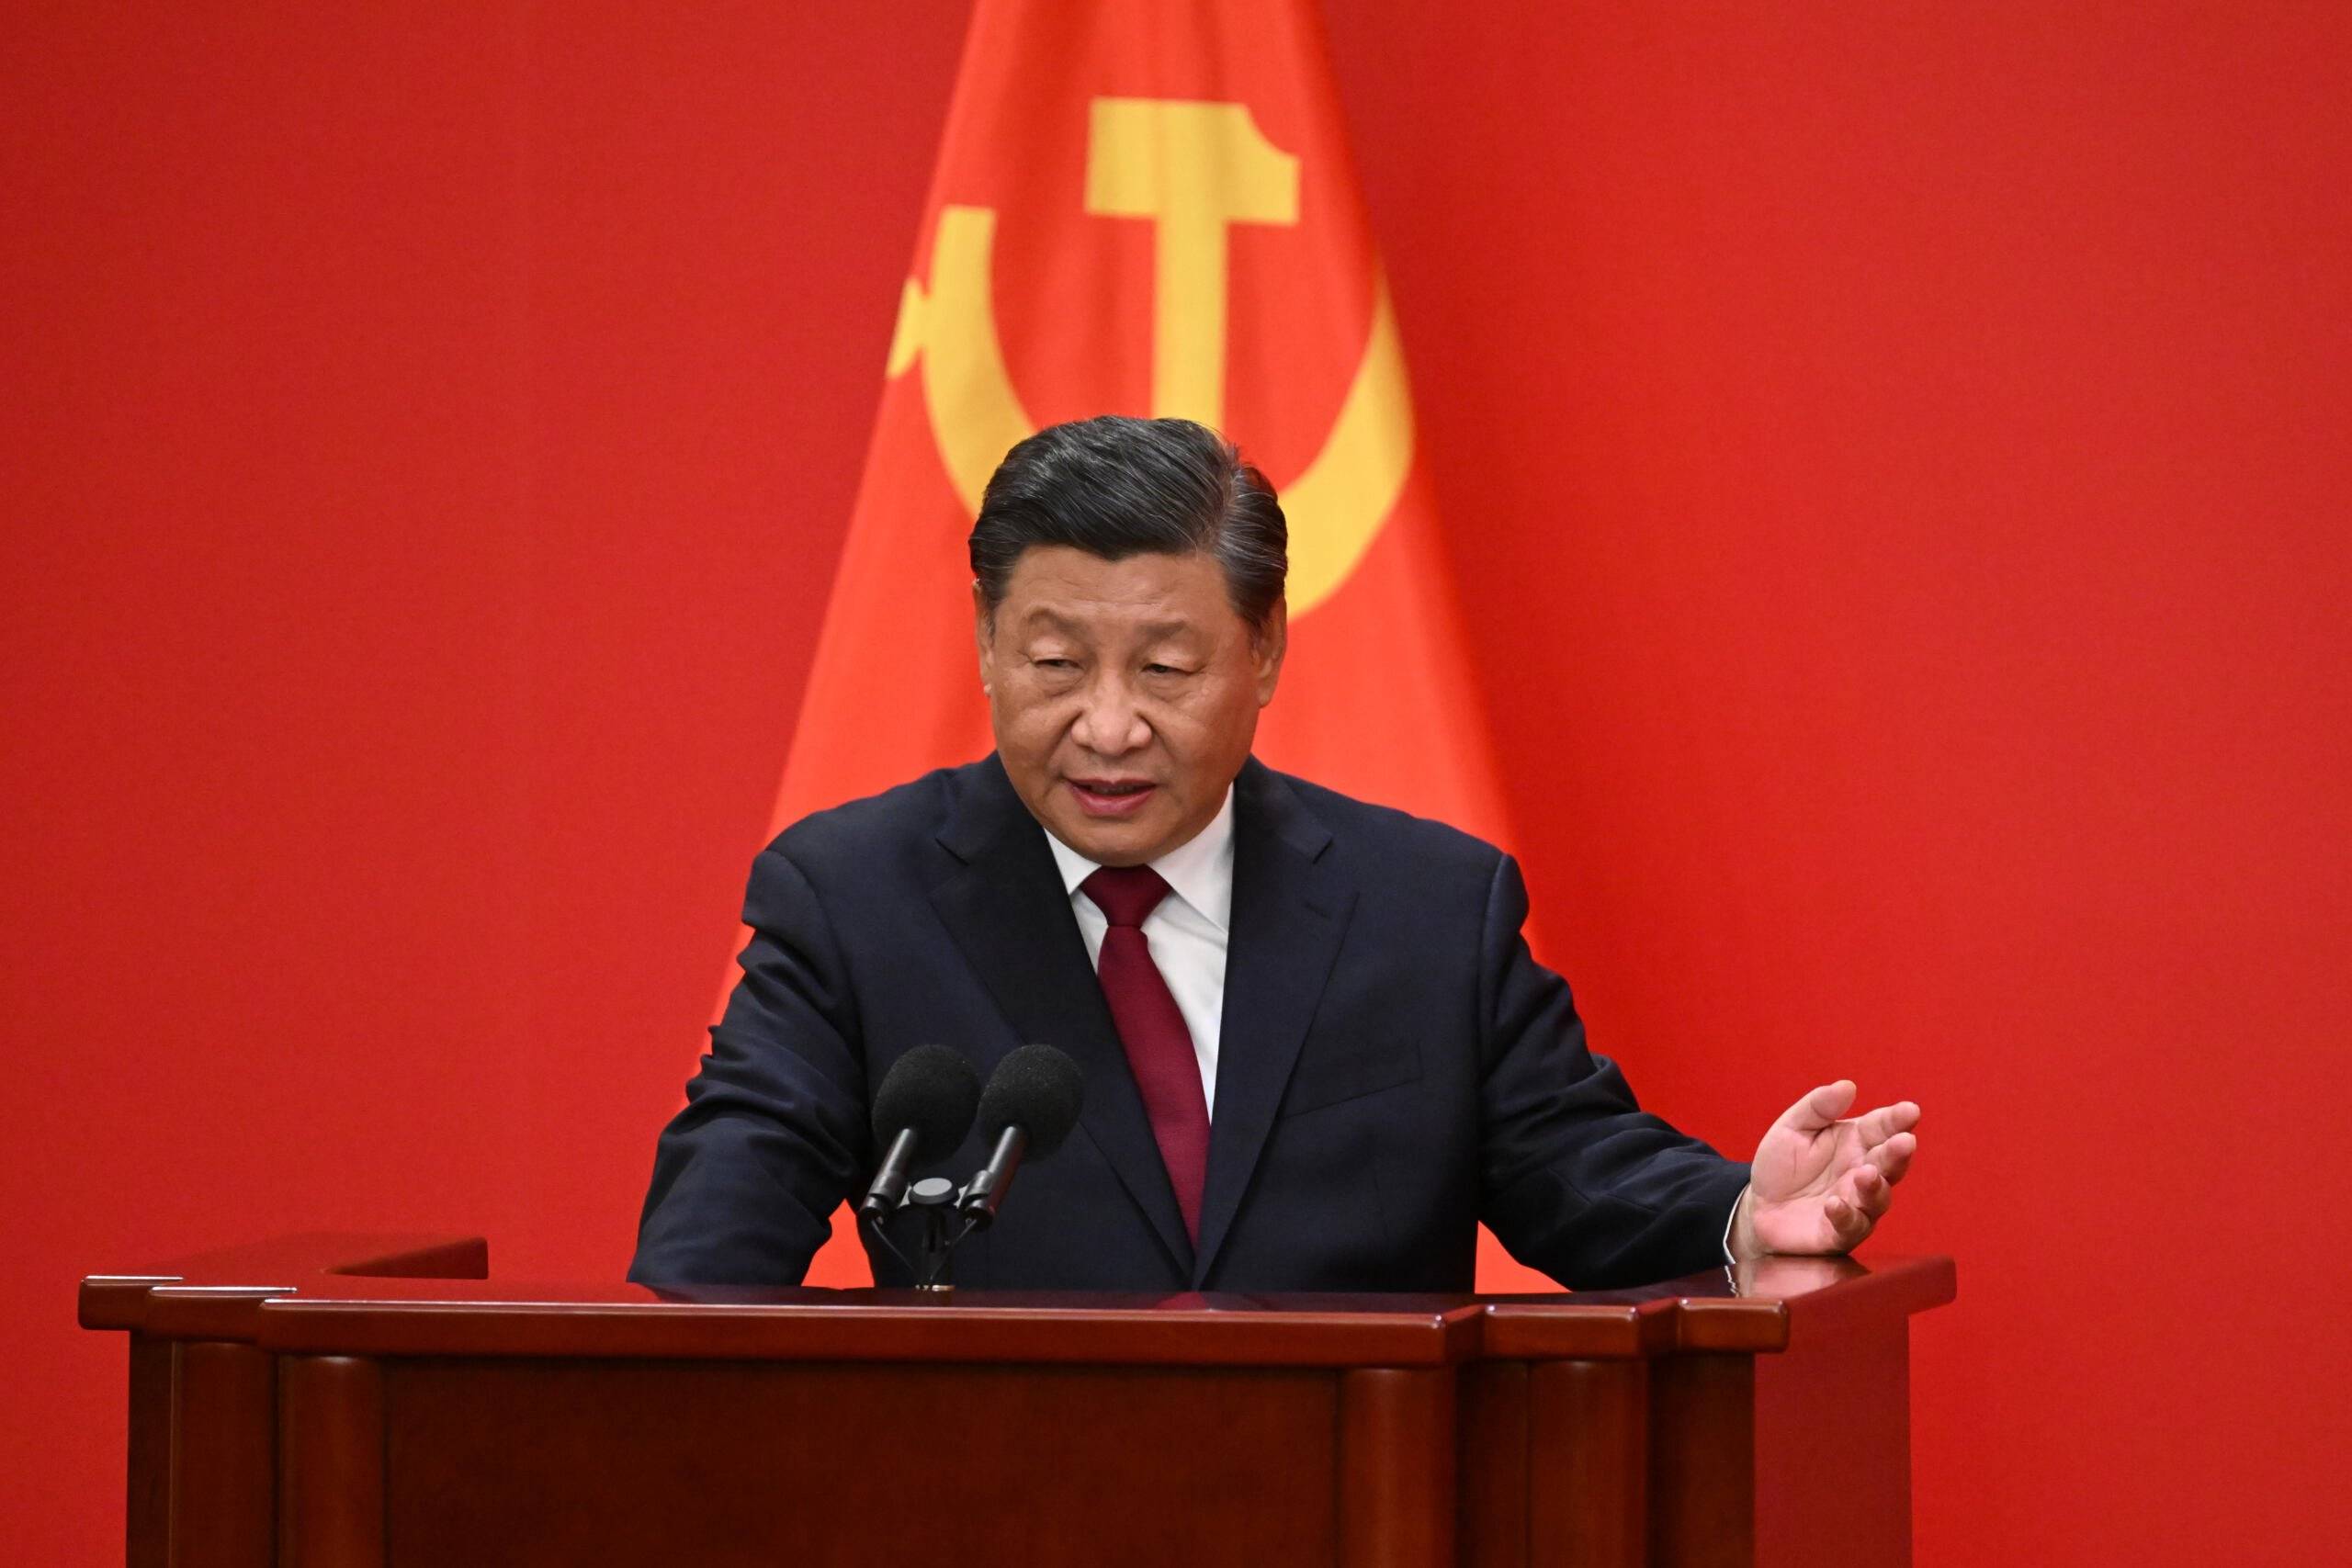 China's President Xi Jinping speaks during an introduction of members of the Chinese Communist Party's new Politburo Standing Committee, the nation's top decision-making body, to the media in the Great Hall of the People in Beijing on October 23, 2022. (Photo by Noel CELIS / AFP)